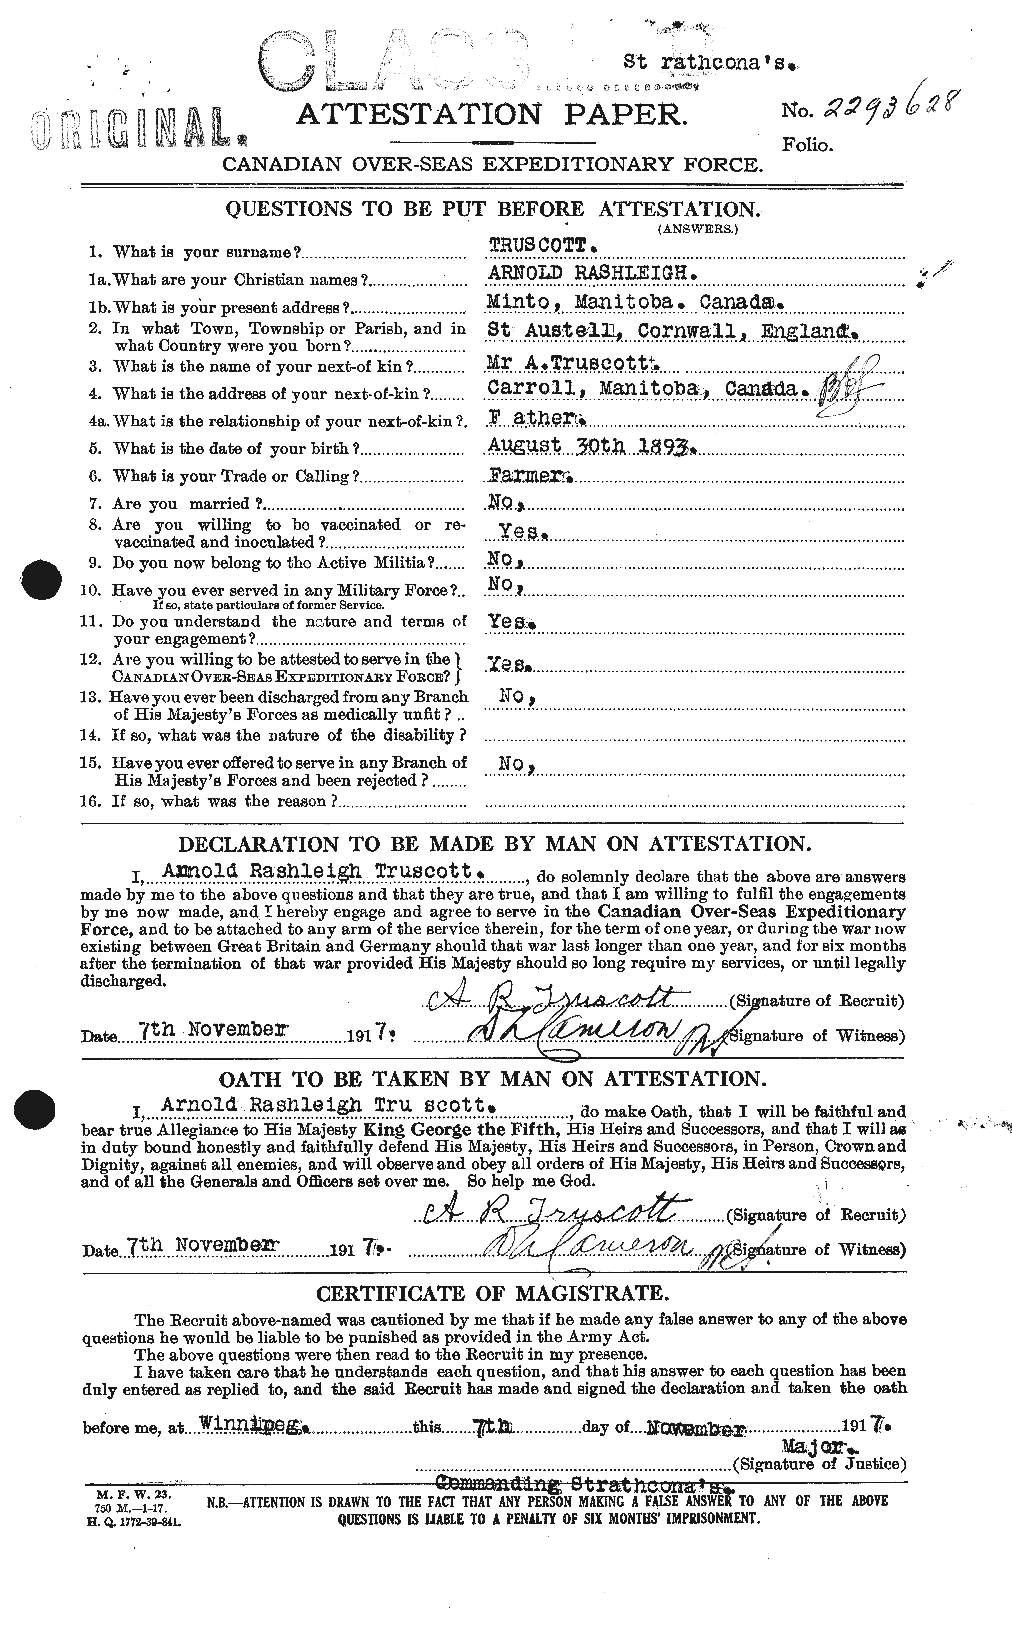 Personnel Records of the First World War - CEF 641580a